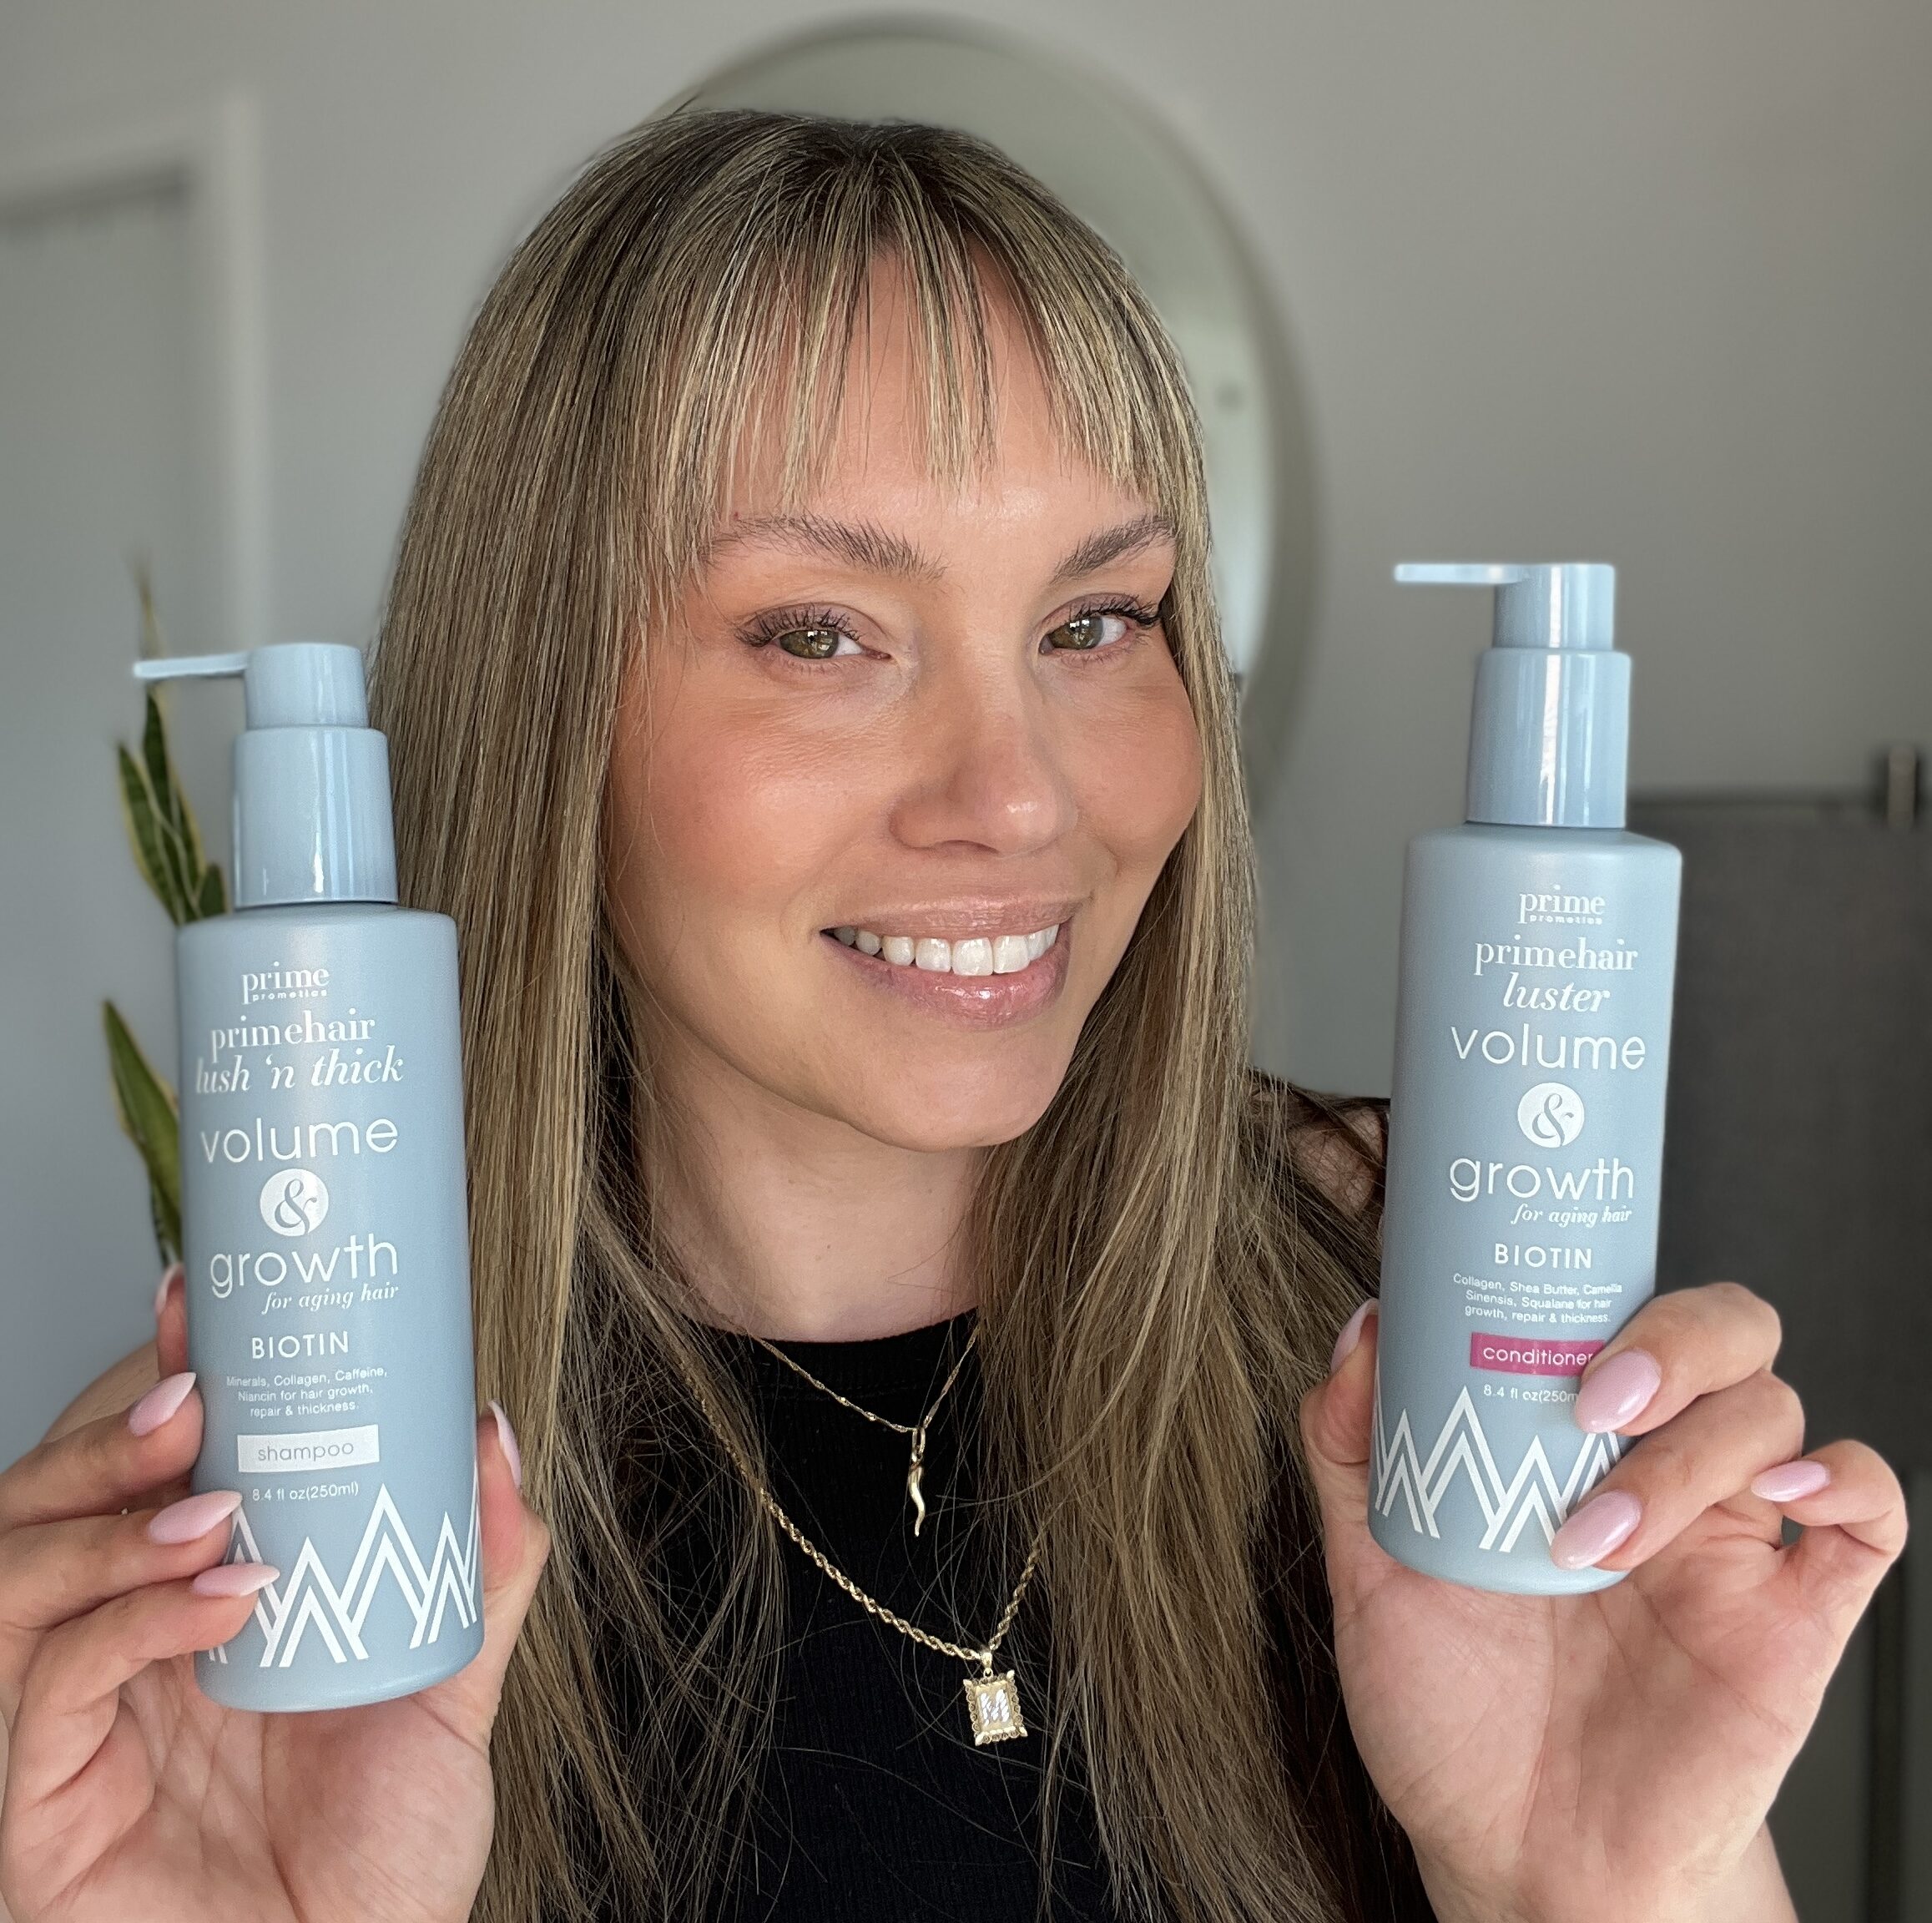 After I Hit My 40s, I Never Thought My Hair Could Look This Good – Until I Found These Products